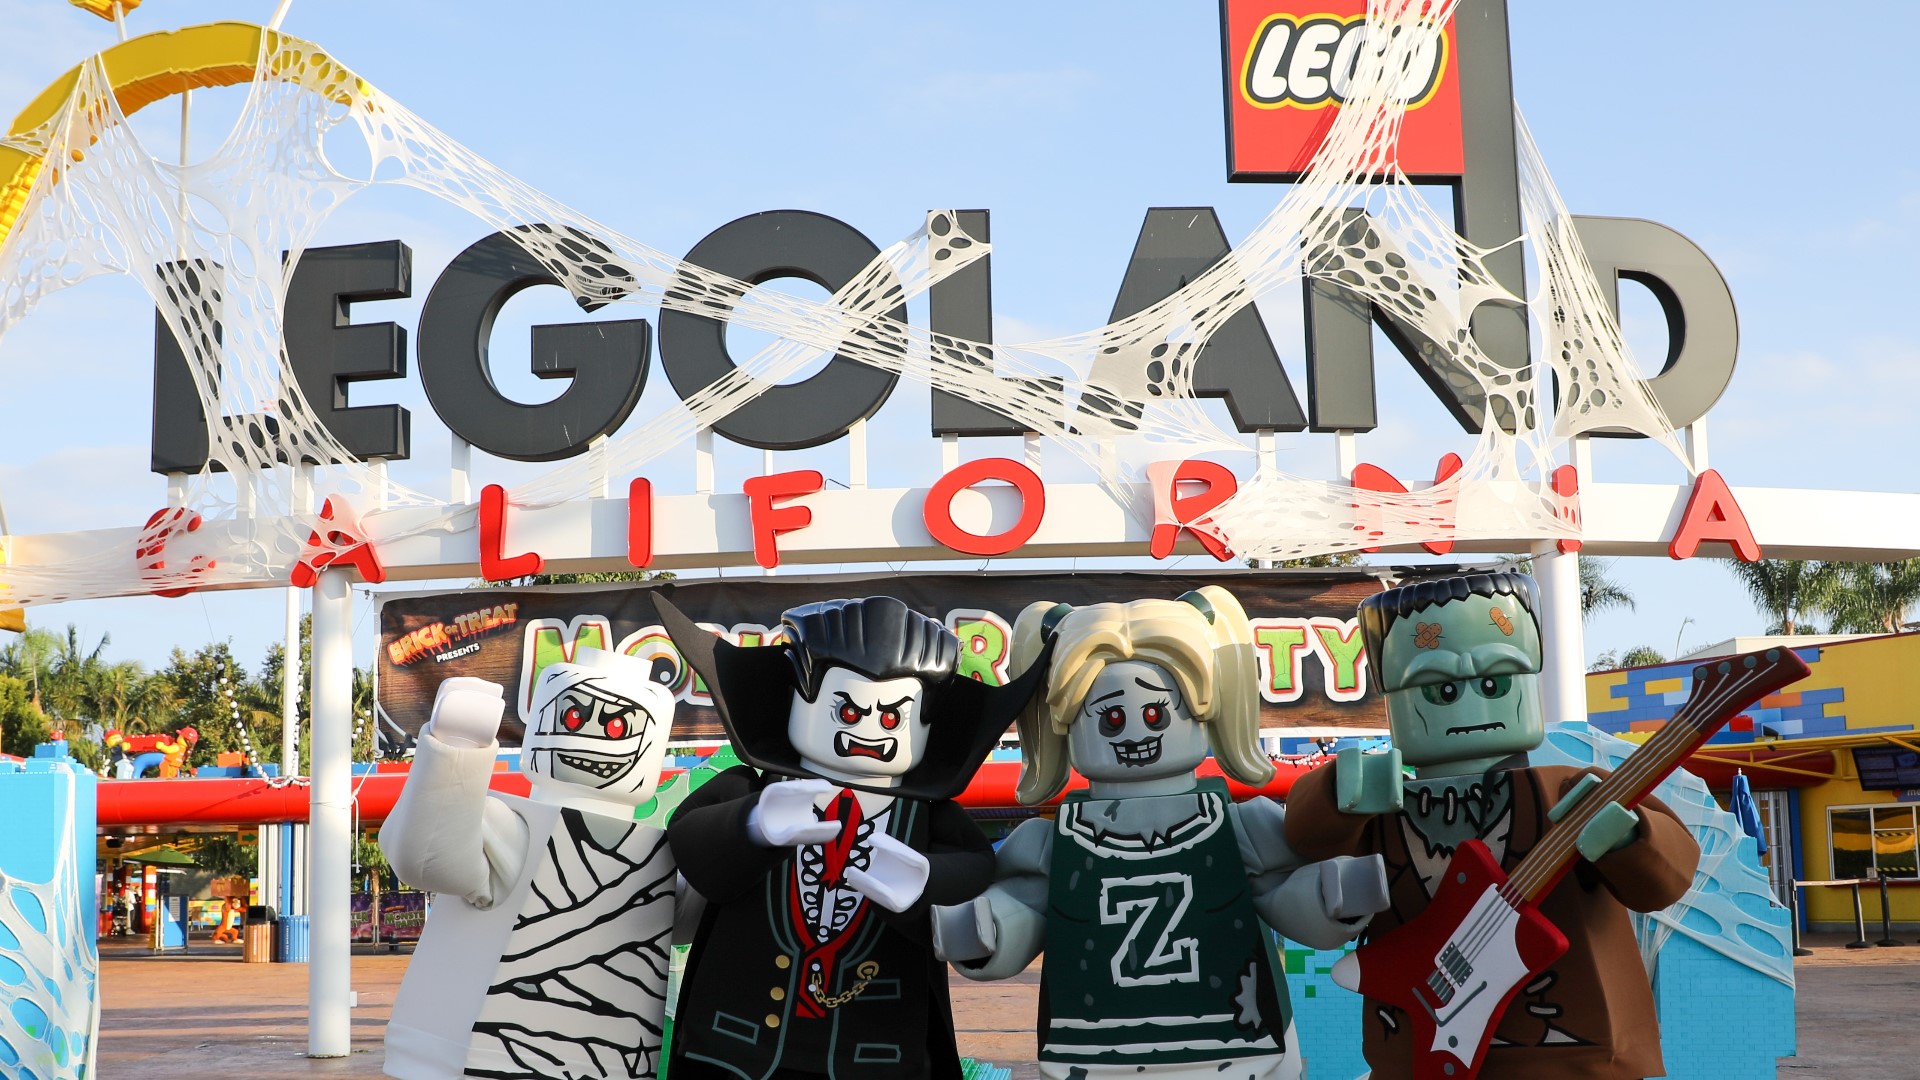 With the weather cooling down and fall right around the corner, Legoland is ready to celebrate Halloween.